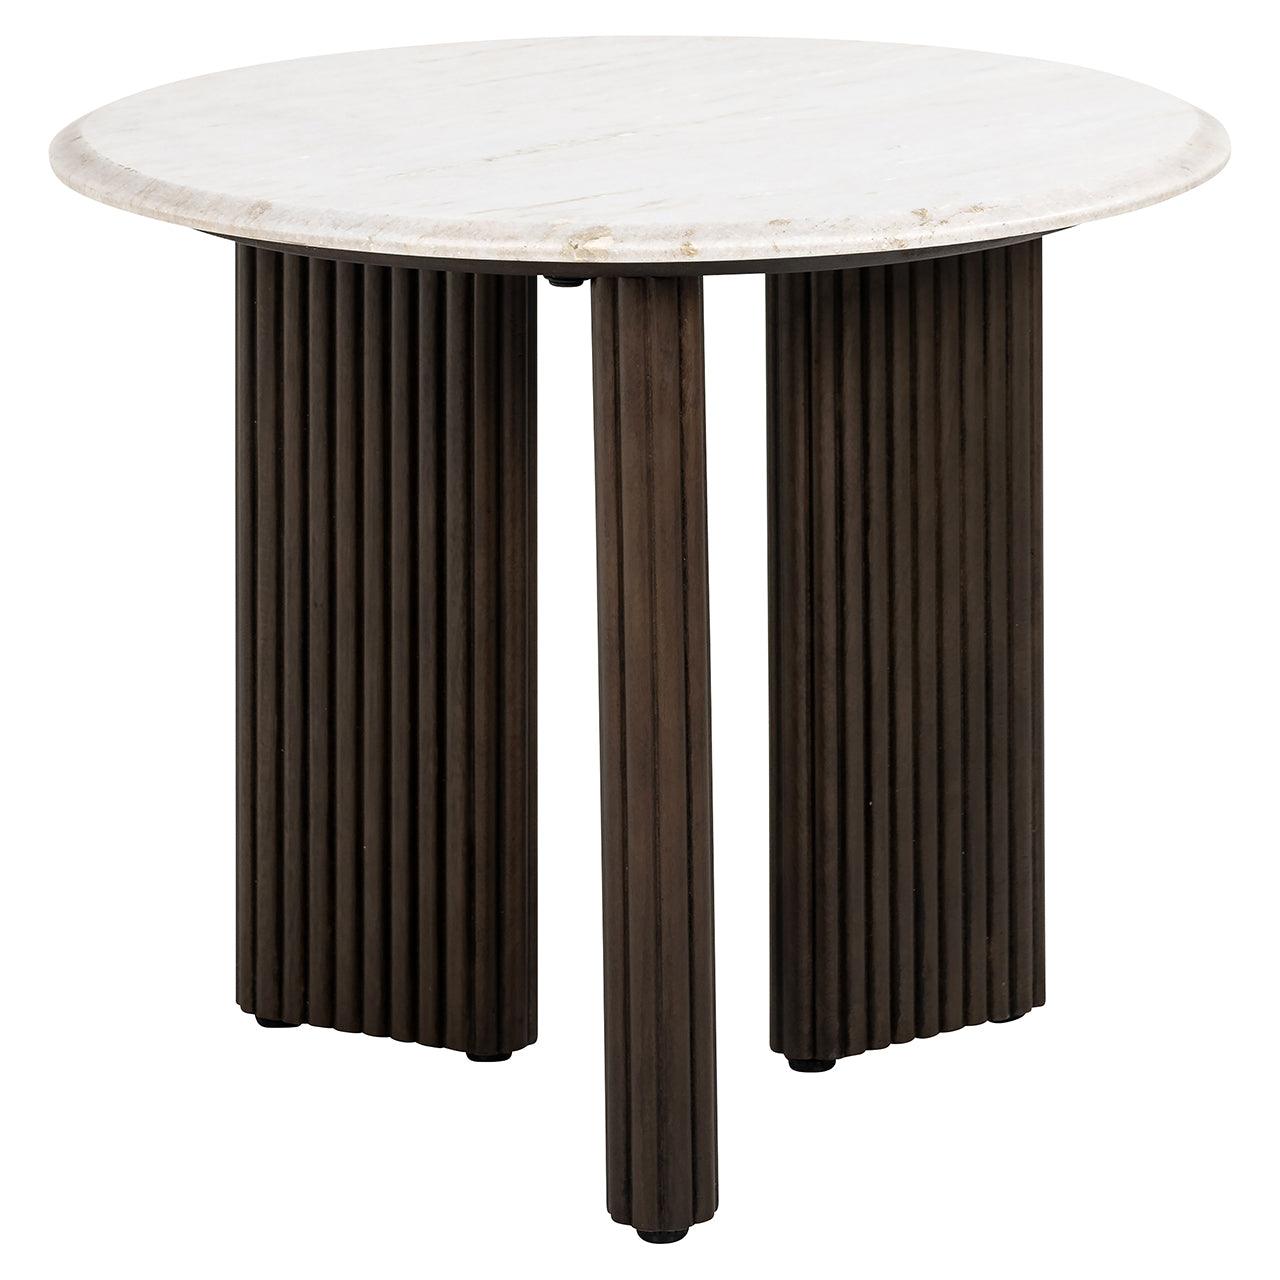 Mayfield White Marble Top Circular Side Table with Brown Wood Base by Richmond Interiors - Maison Rêves UK